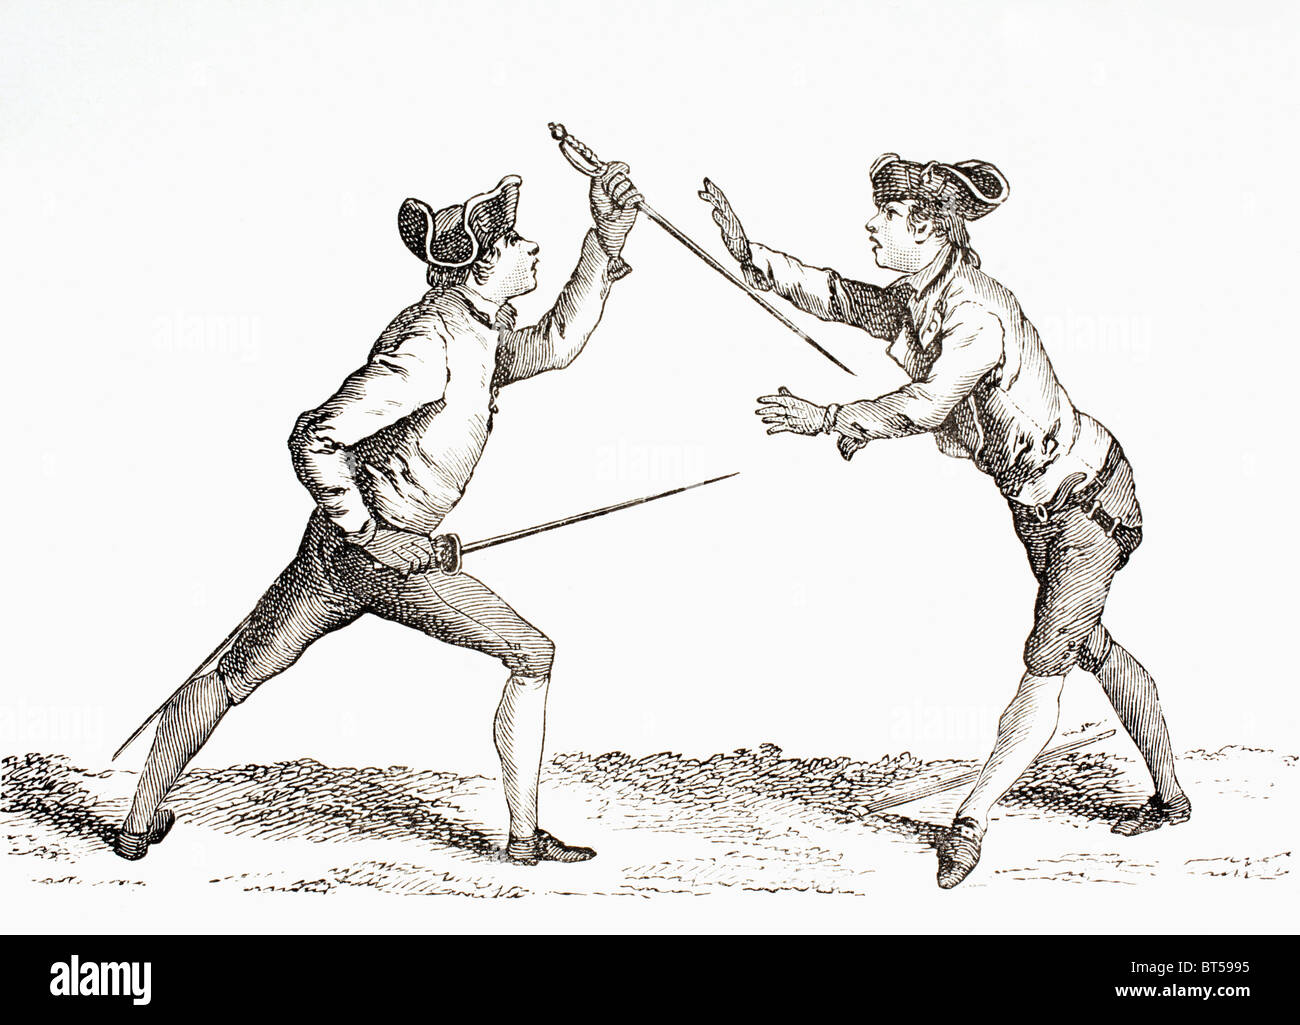 A swordsman disarms his opponent and is in a position to thrust. Stock Photo